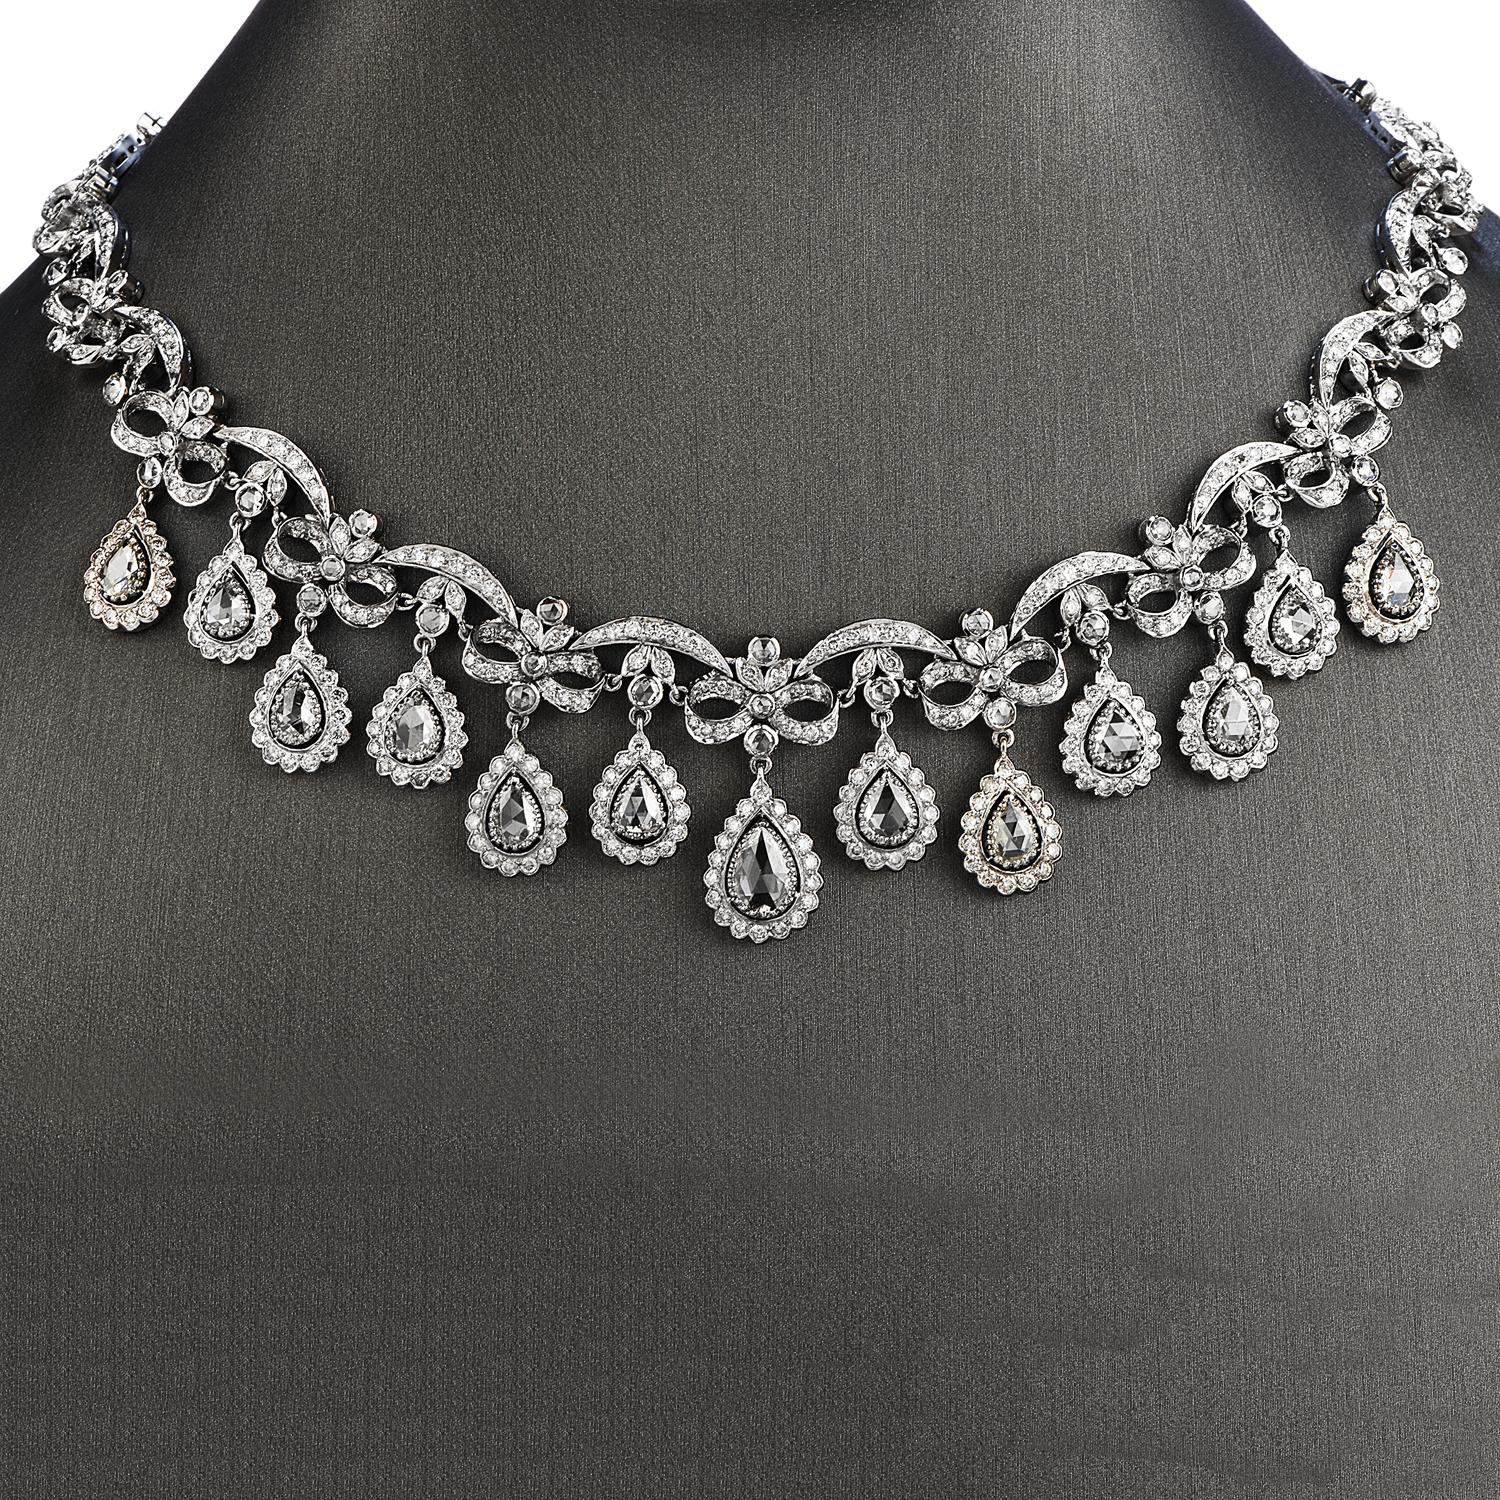 Exquisite Diamond Drop Bow Necklace with Oustanding craftsmanship in this 18k white gold. This necklace which showcases 13 Pear-Shaped Rose Cut Diamonds, weighing 6.80 carats, I-J color & VS, SI Clarity.

  Additionally, there are 160 Round